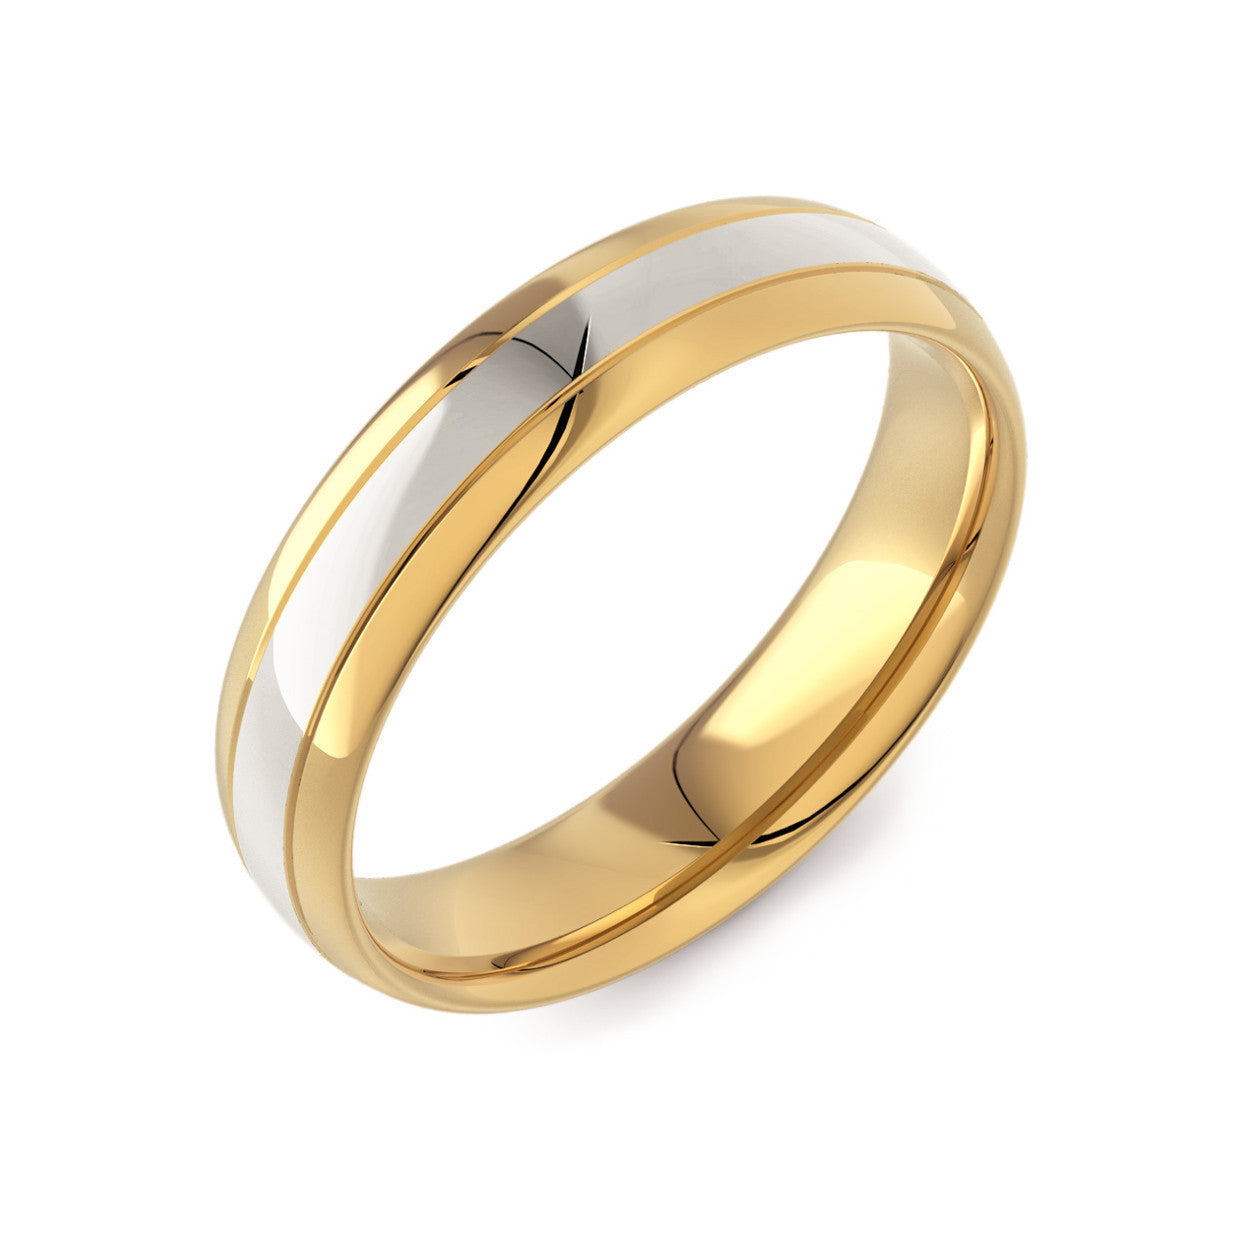 Two Tone Gold Classic Court Wedding Ring - engagement-rings.co.uk